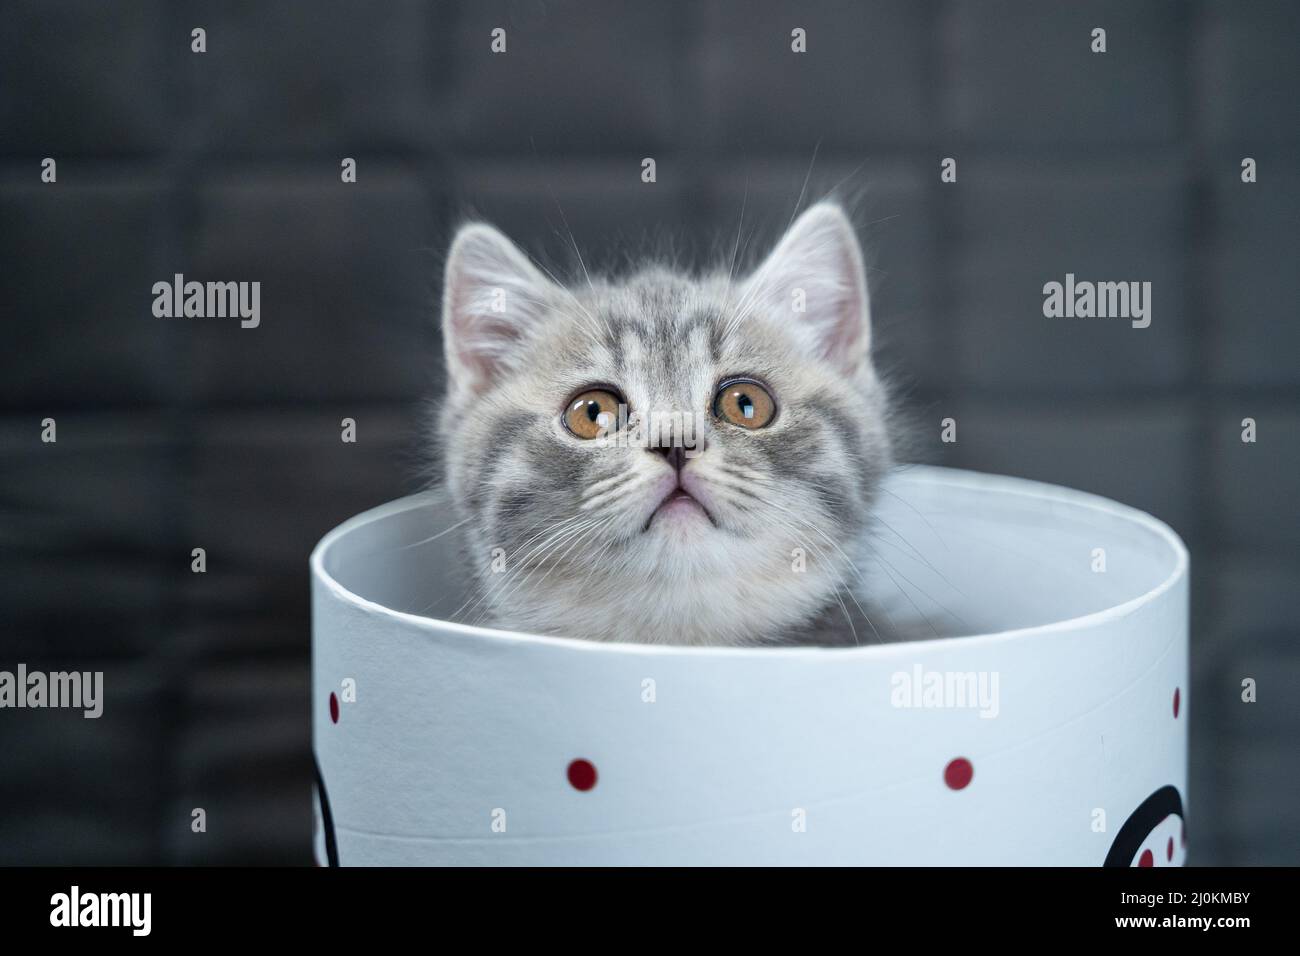 Funny gray Scottish Straight kitten plays jumping and looks out of gift box with heart on sofa at home. Funny baby cat tabby ind Stock Photo